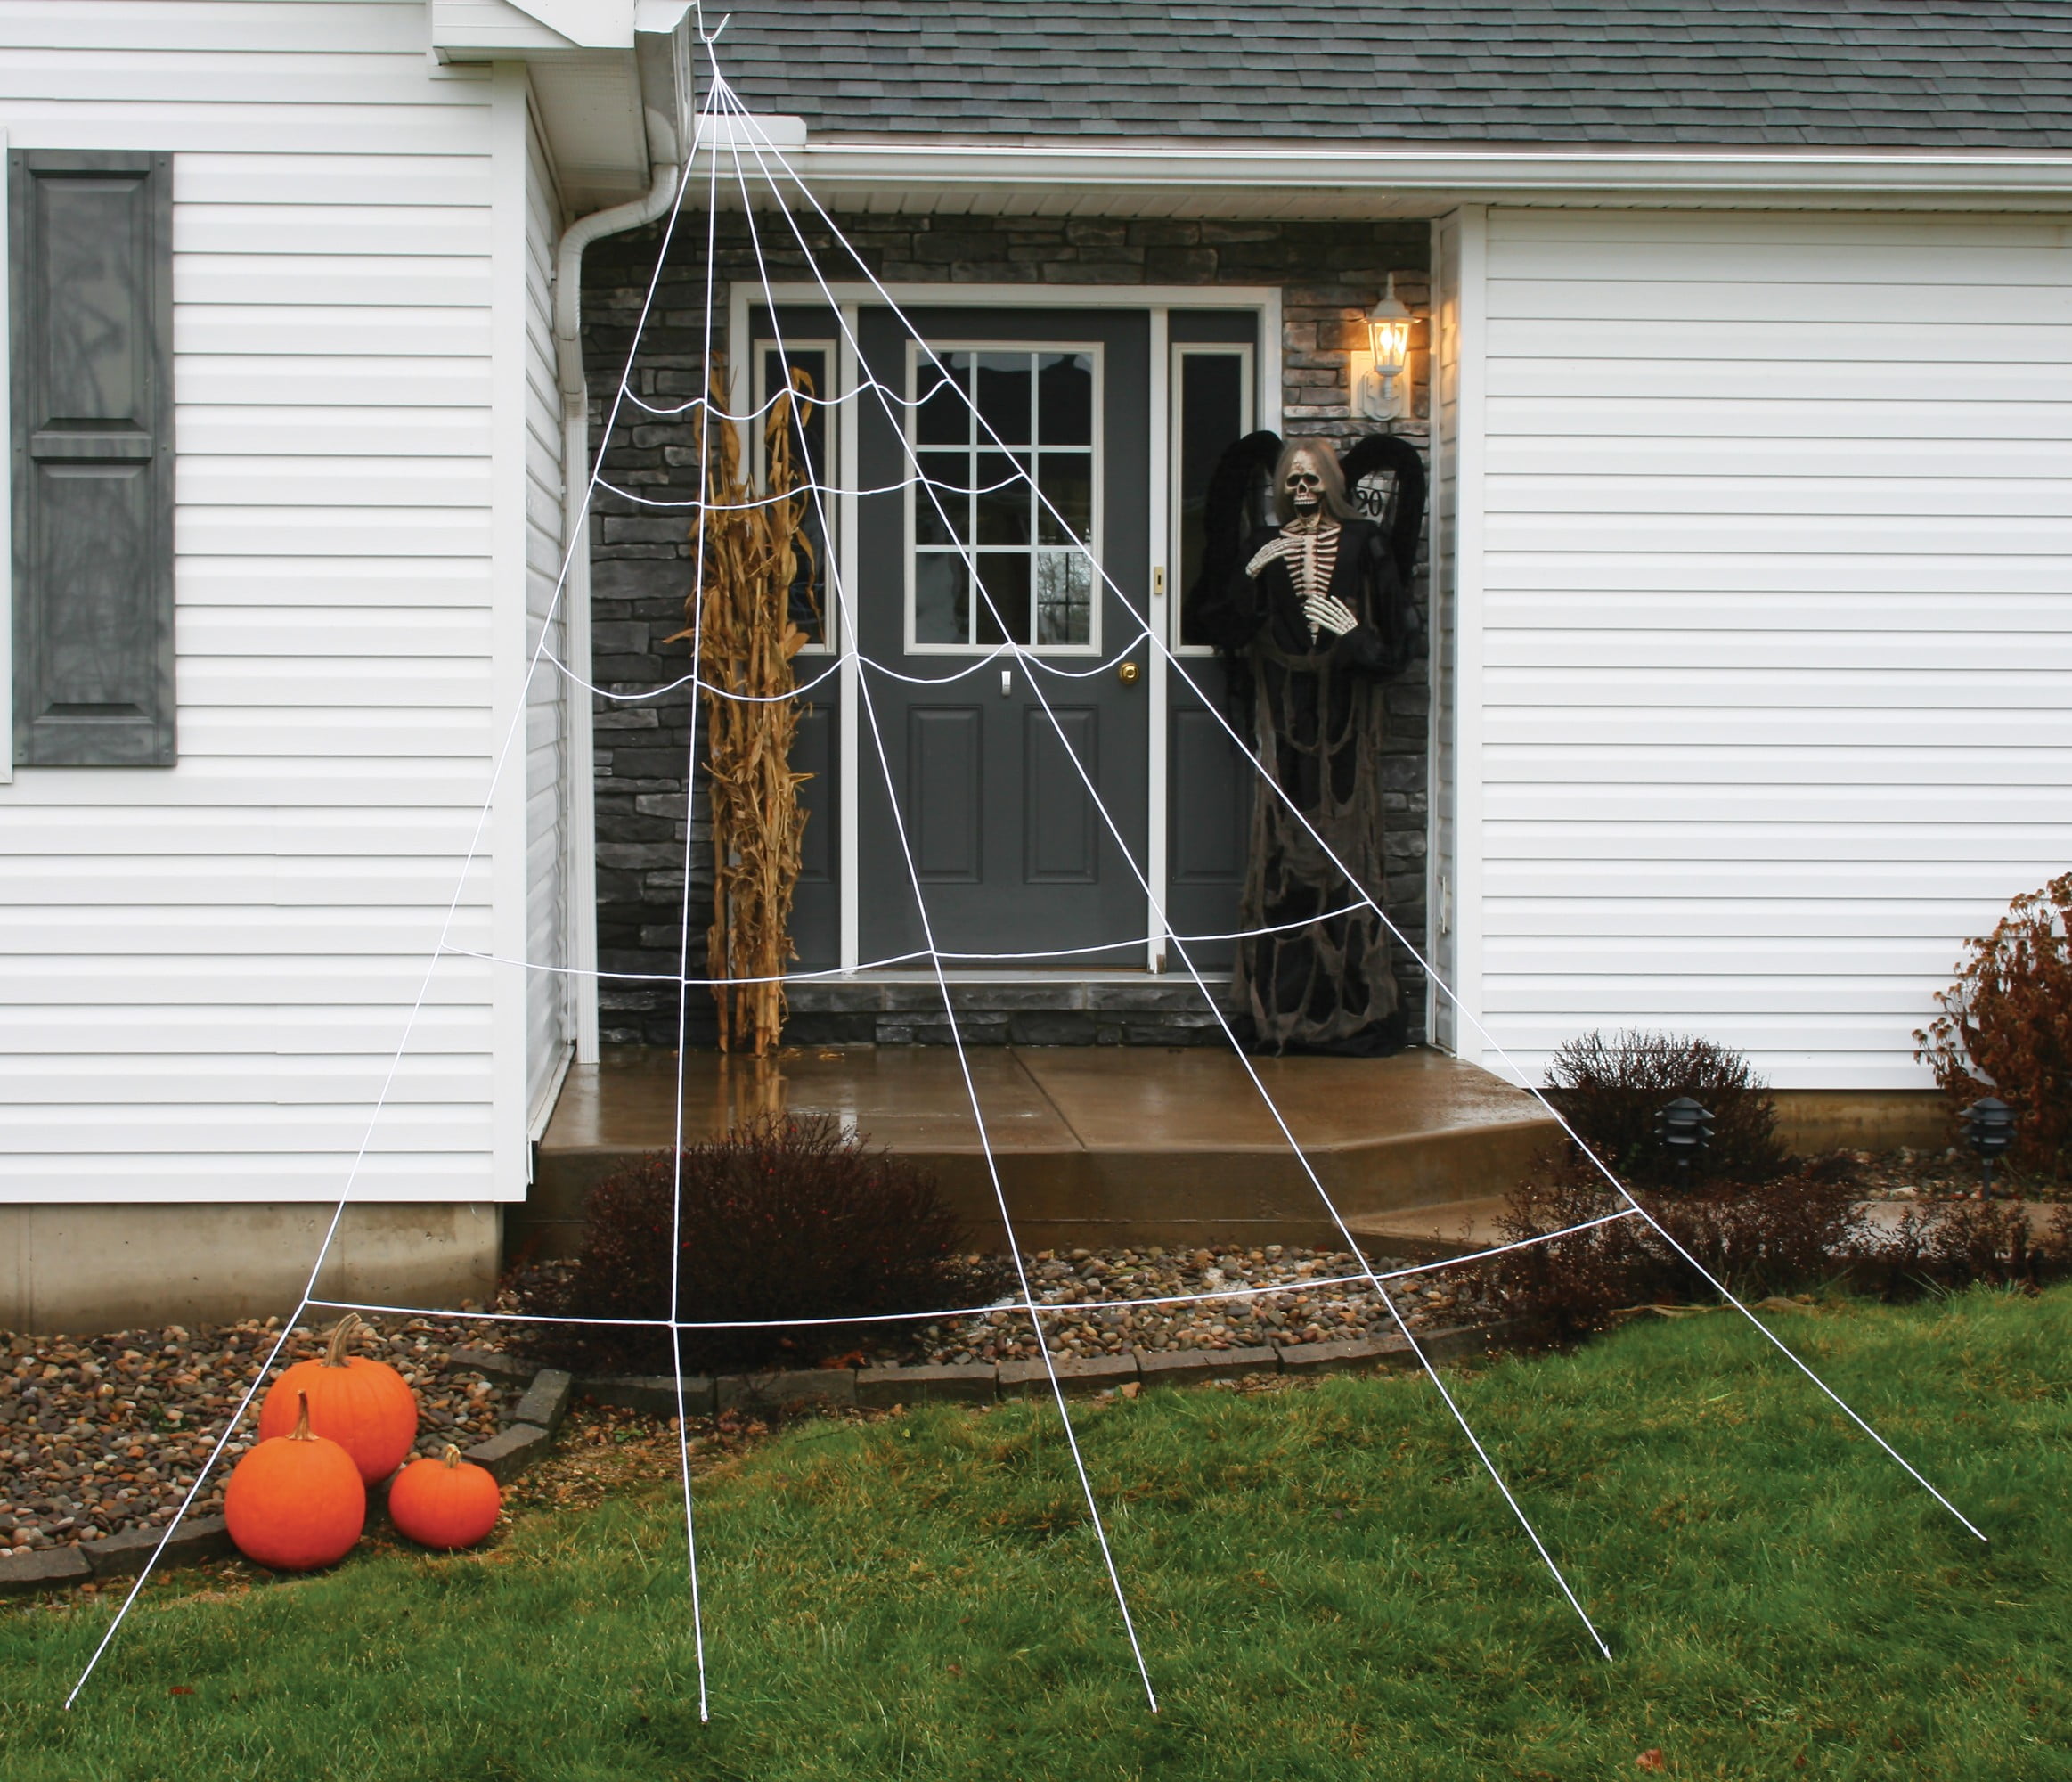 Stretch Spider White Web. PETUOL Halloween Decorations 6.6 Ft 200cm Giant Scary Spider with 9 Ft Round Web Outdoor Decor Yard Decorations Outdoor Yard Fake Hairy Poseable Spider Props 